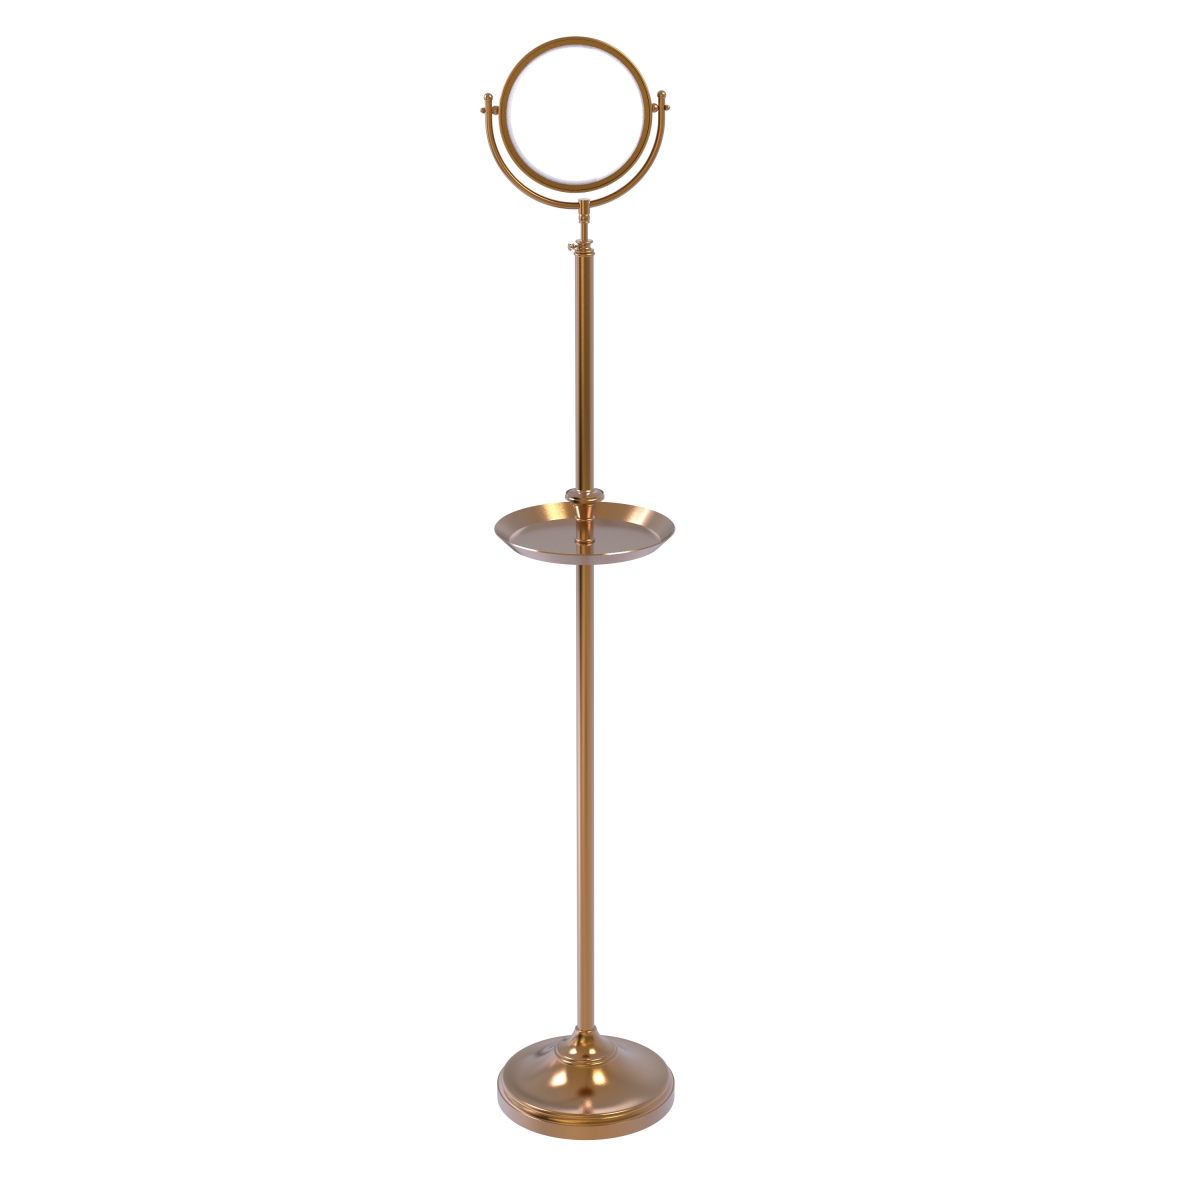 Allied Brass DMF-3-4X-BBR Floor Standing Make-Up Mirror 8 in. dia. with 4X Magnification & Shaving Tray, Brushed Bronze